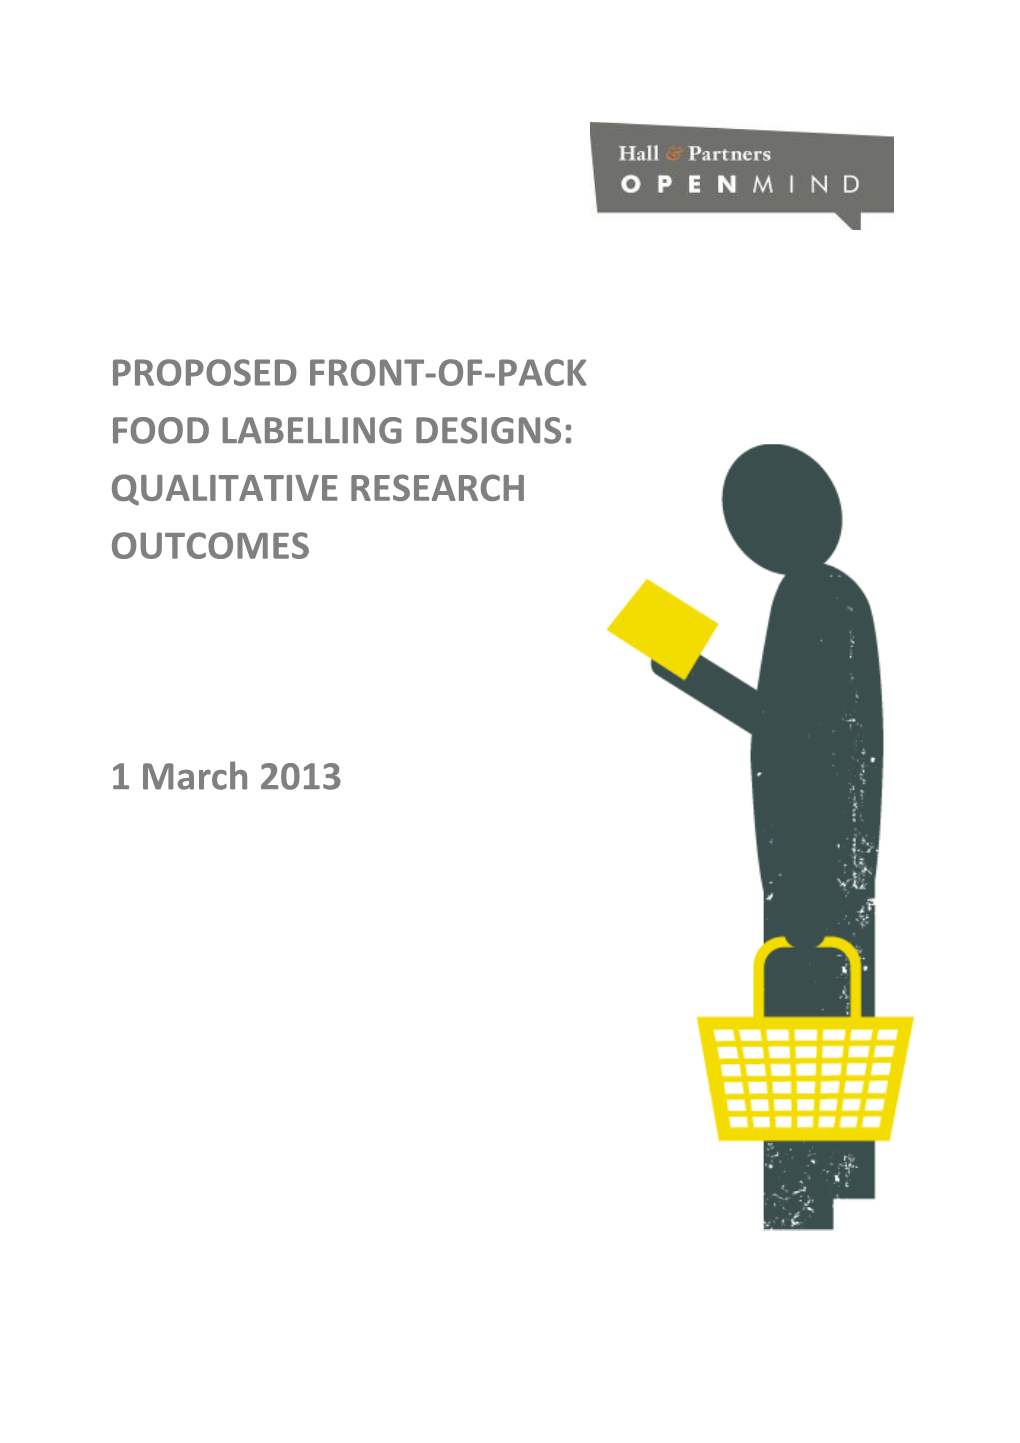 Department of Health and Ageing Front of Pack Food Labelling Designs Researchpage: 1